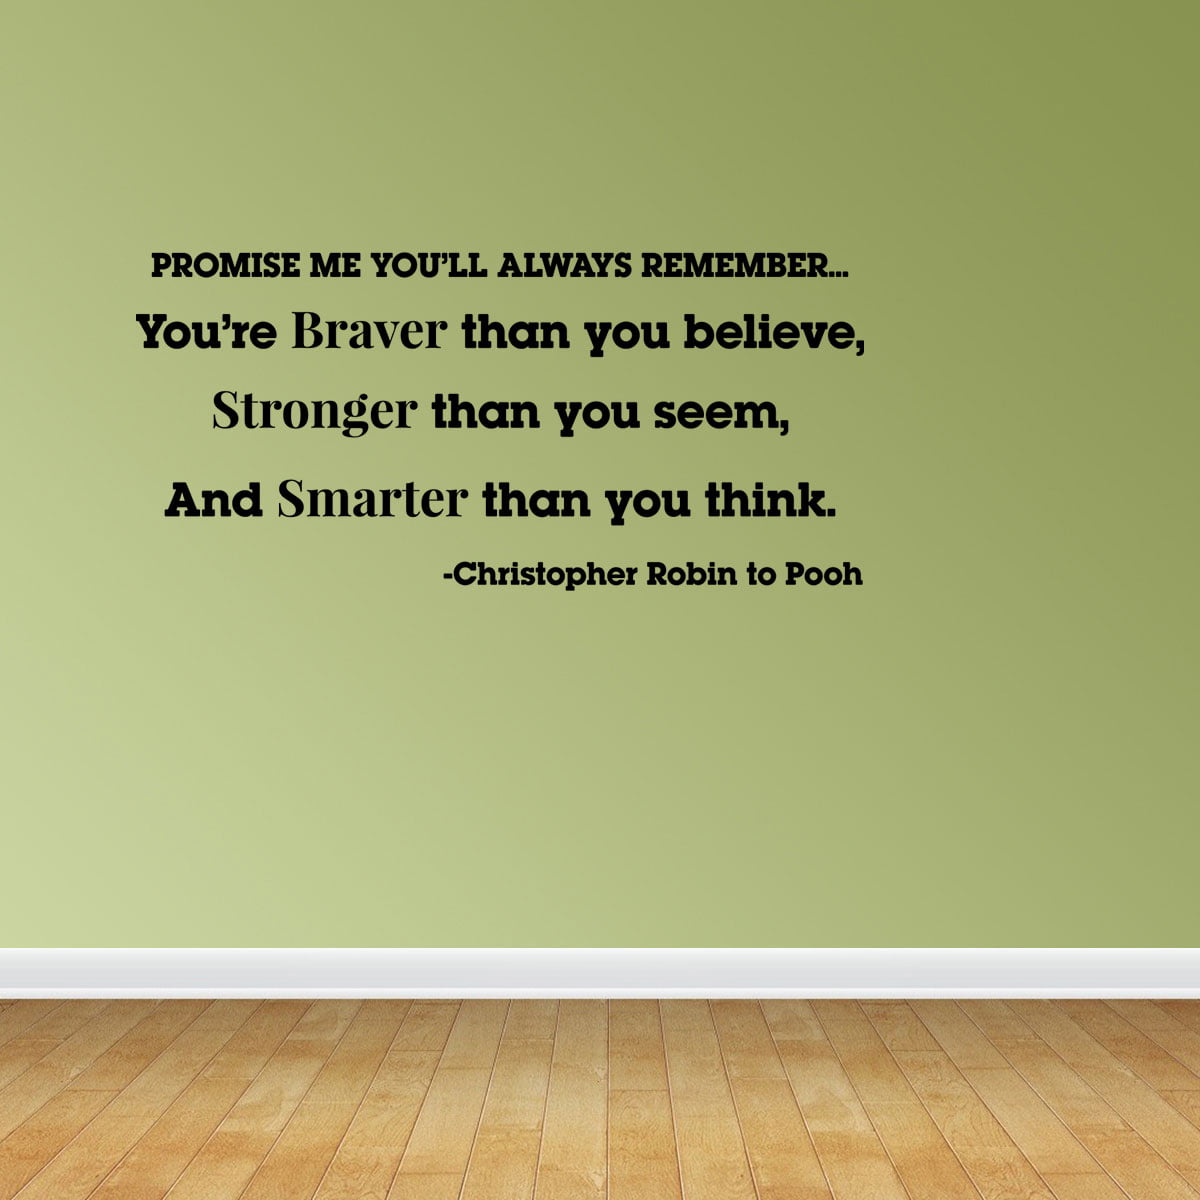 You're Braver than you think Stronger Smarter Winnie The Pooh Quote Wall Sticker 